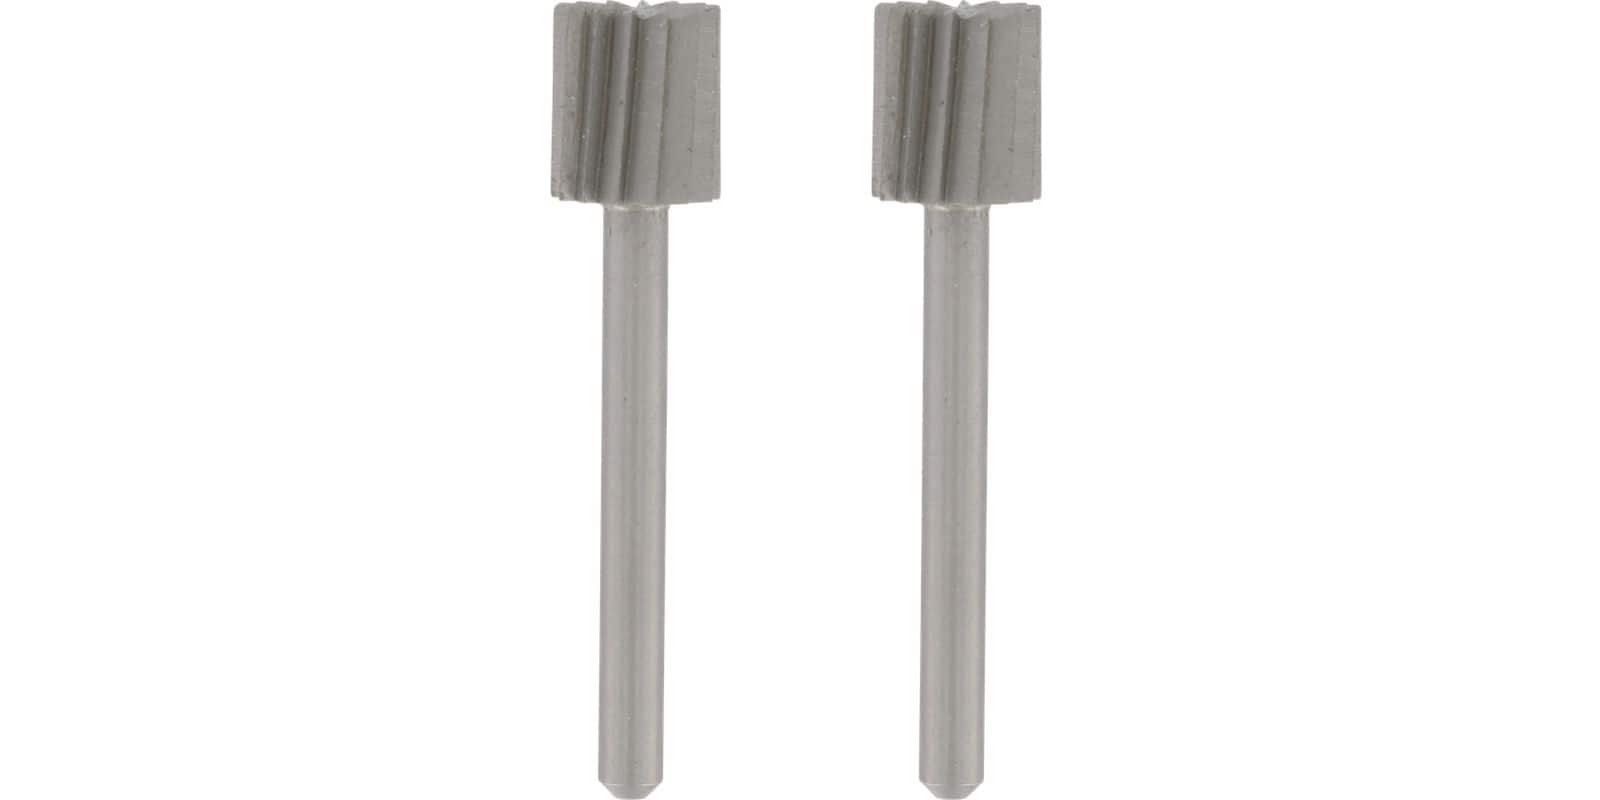 Dremel 115 Cylindrical Steel Carving Bit For Rotary Tool, 5/16-in, 2-pk